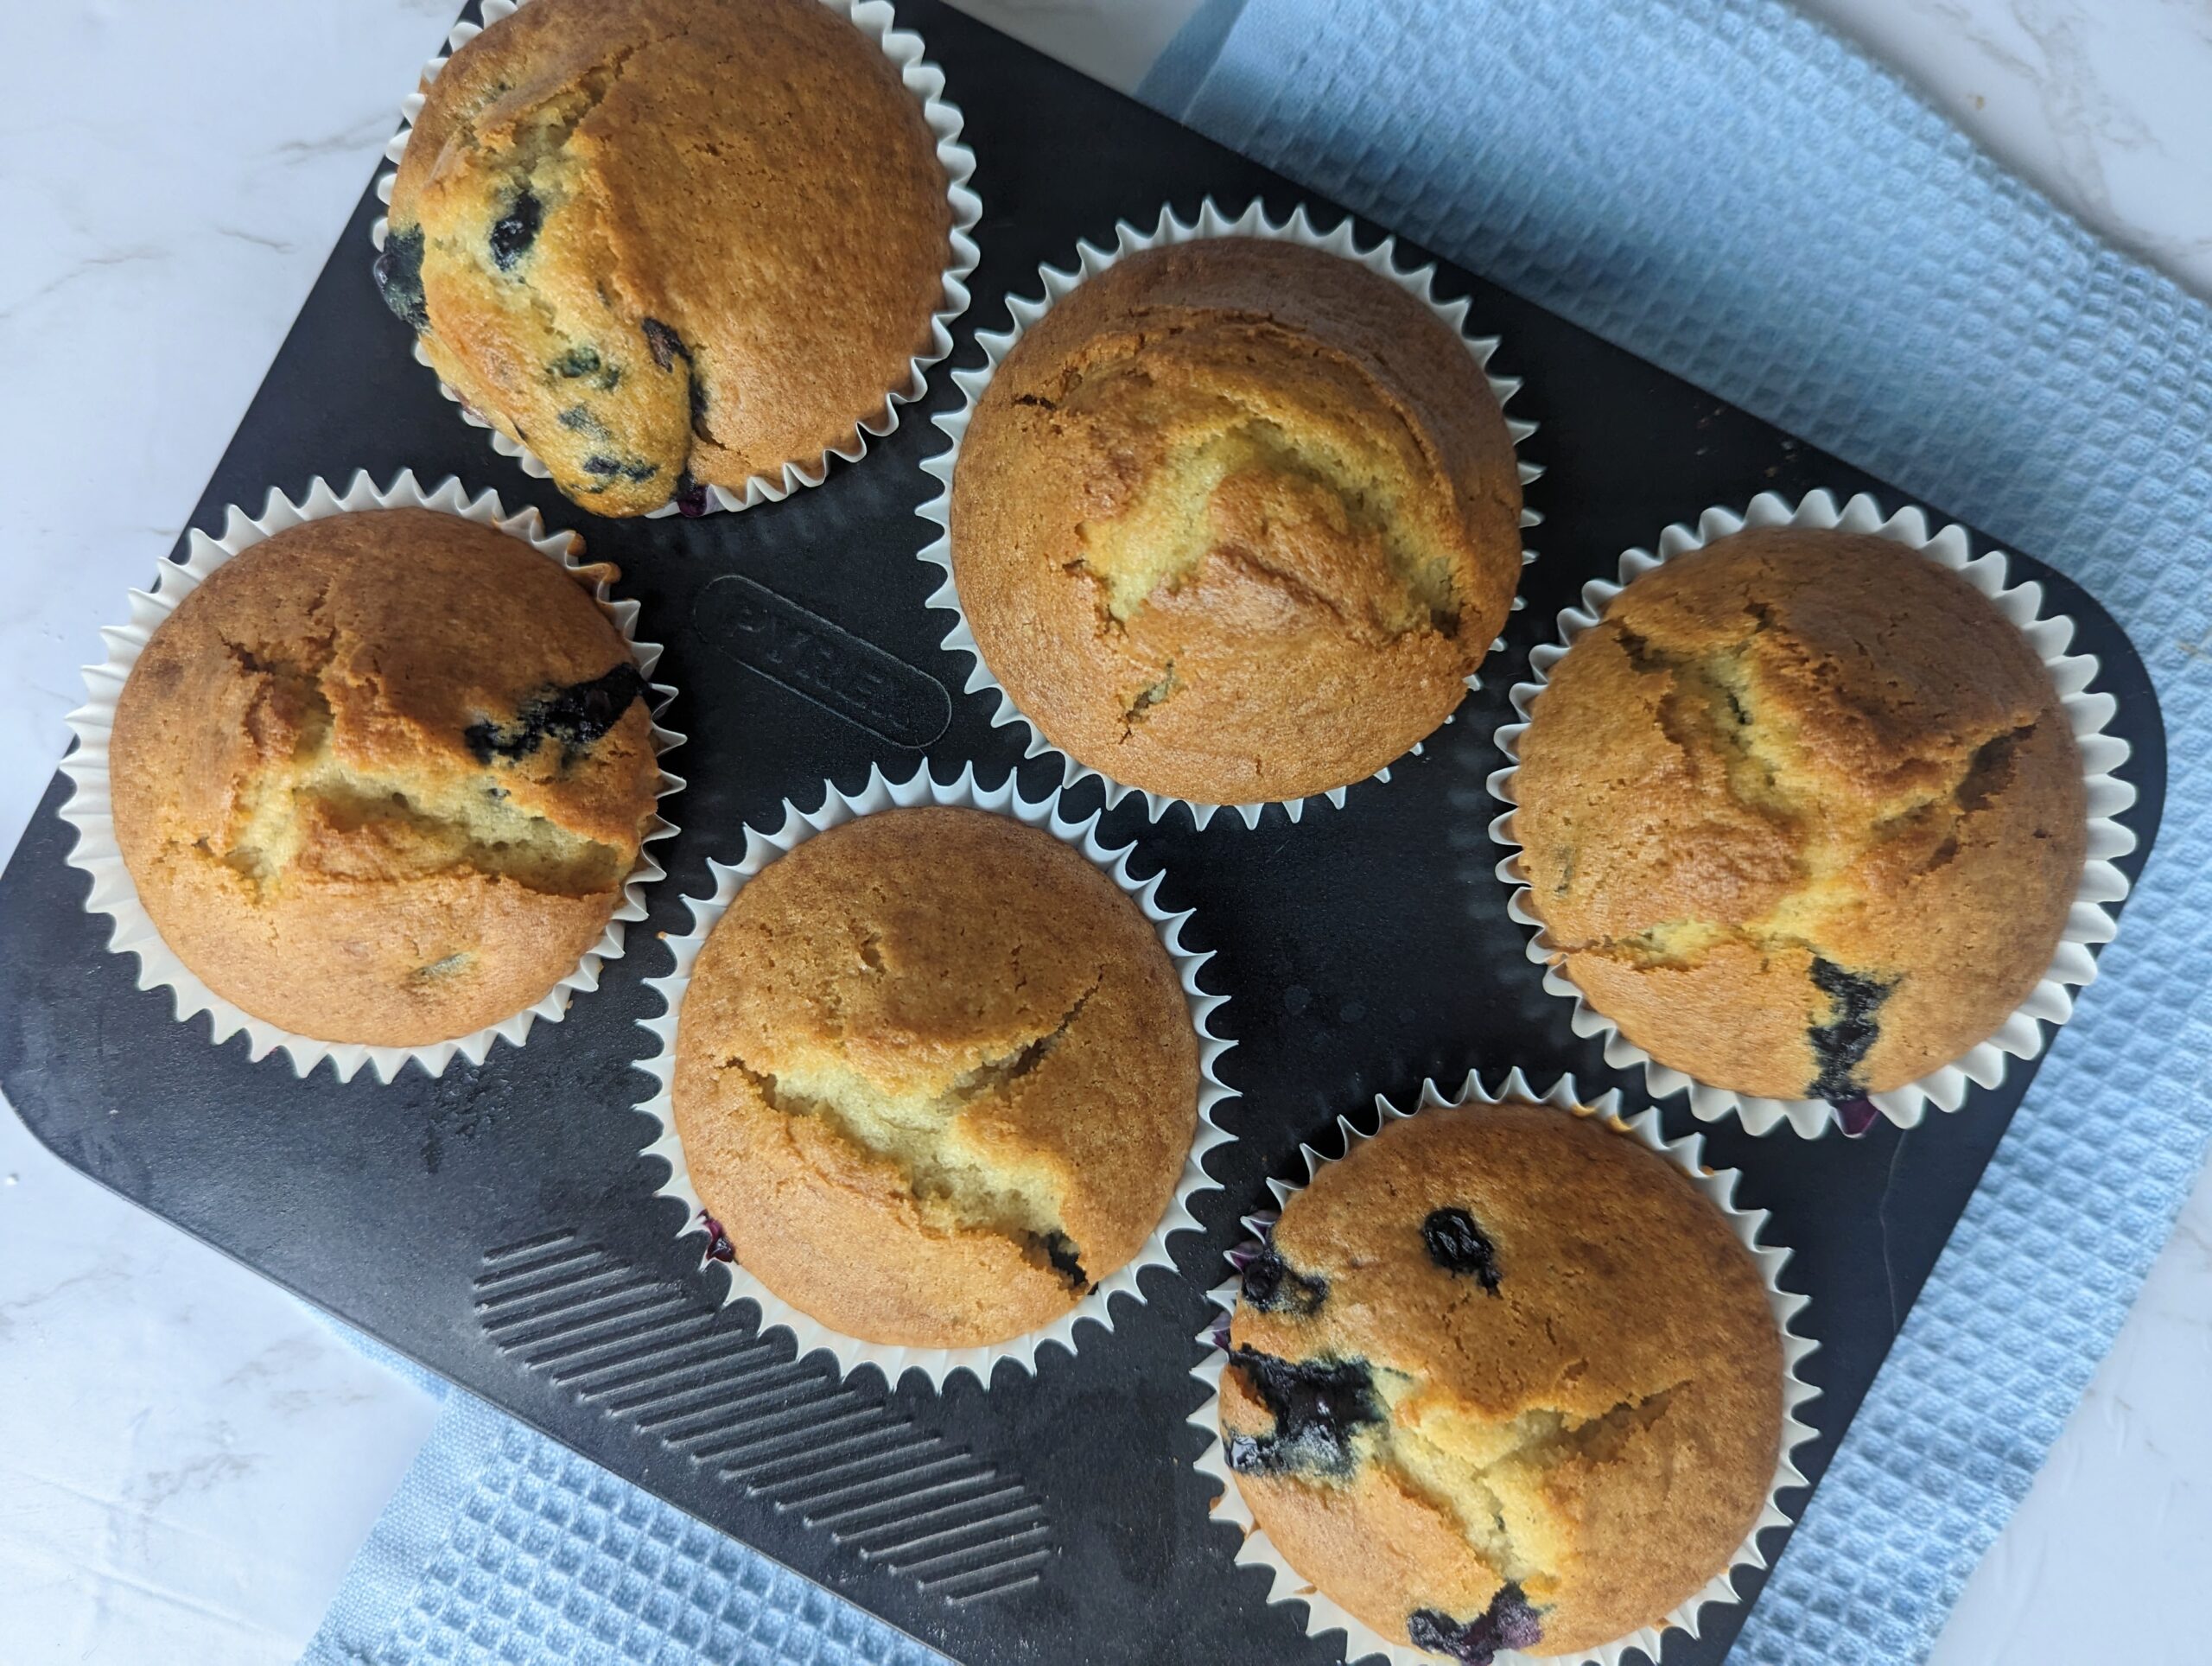 Gluten and dairy free blueberry muffins